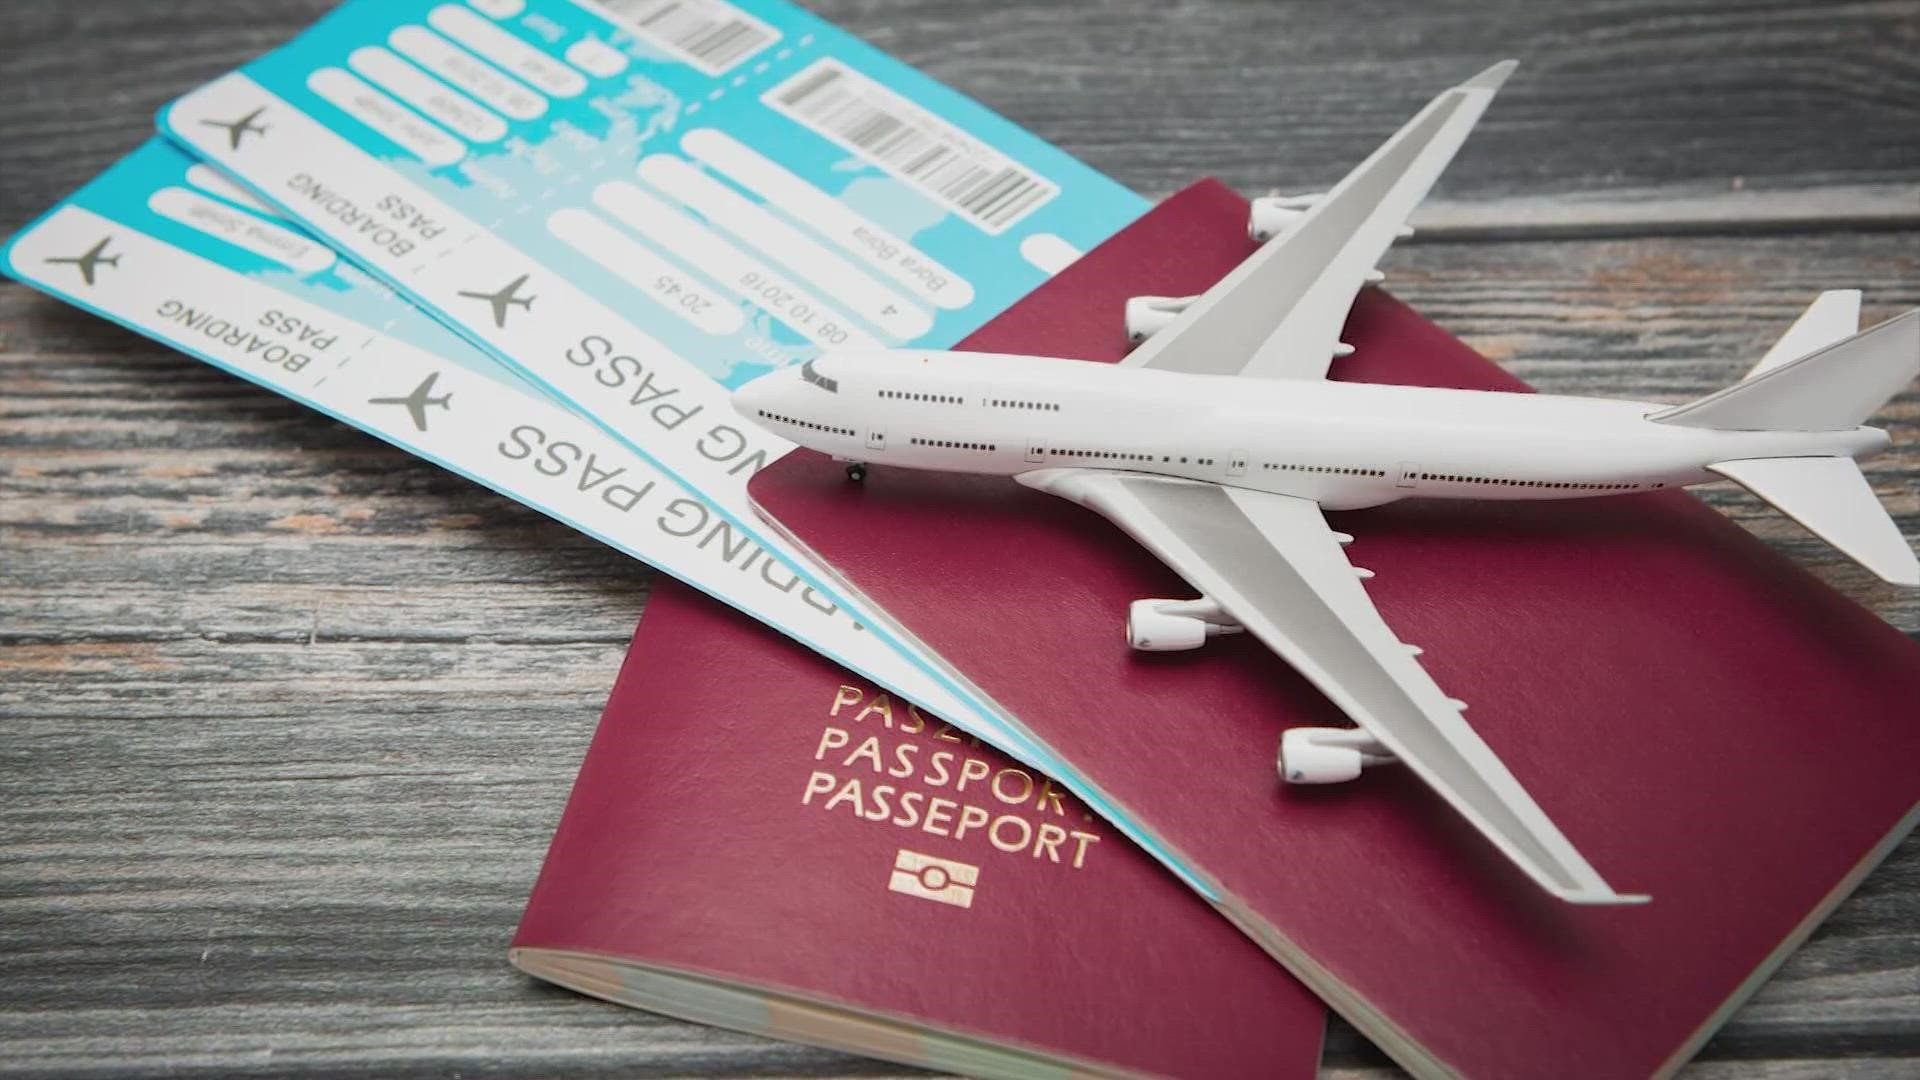 Airline Tickets: Everything You Need to Know to Find the Best Deals